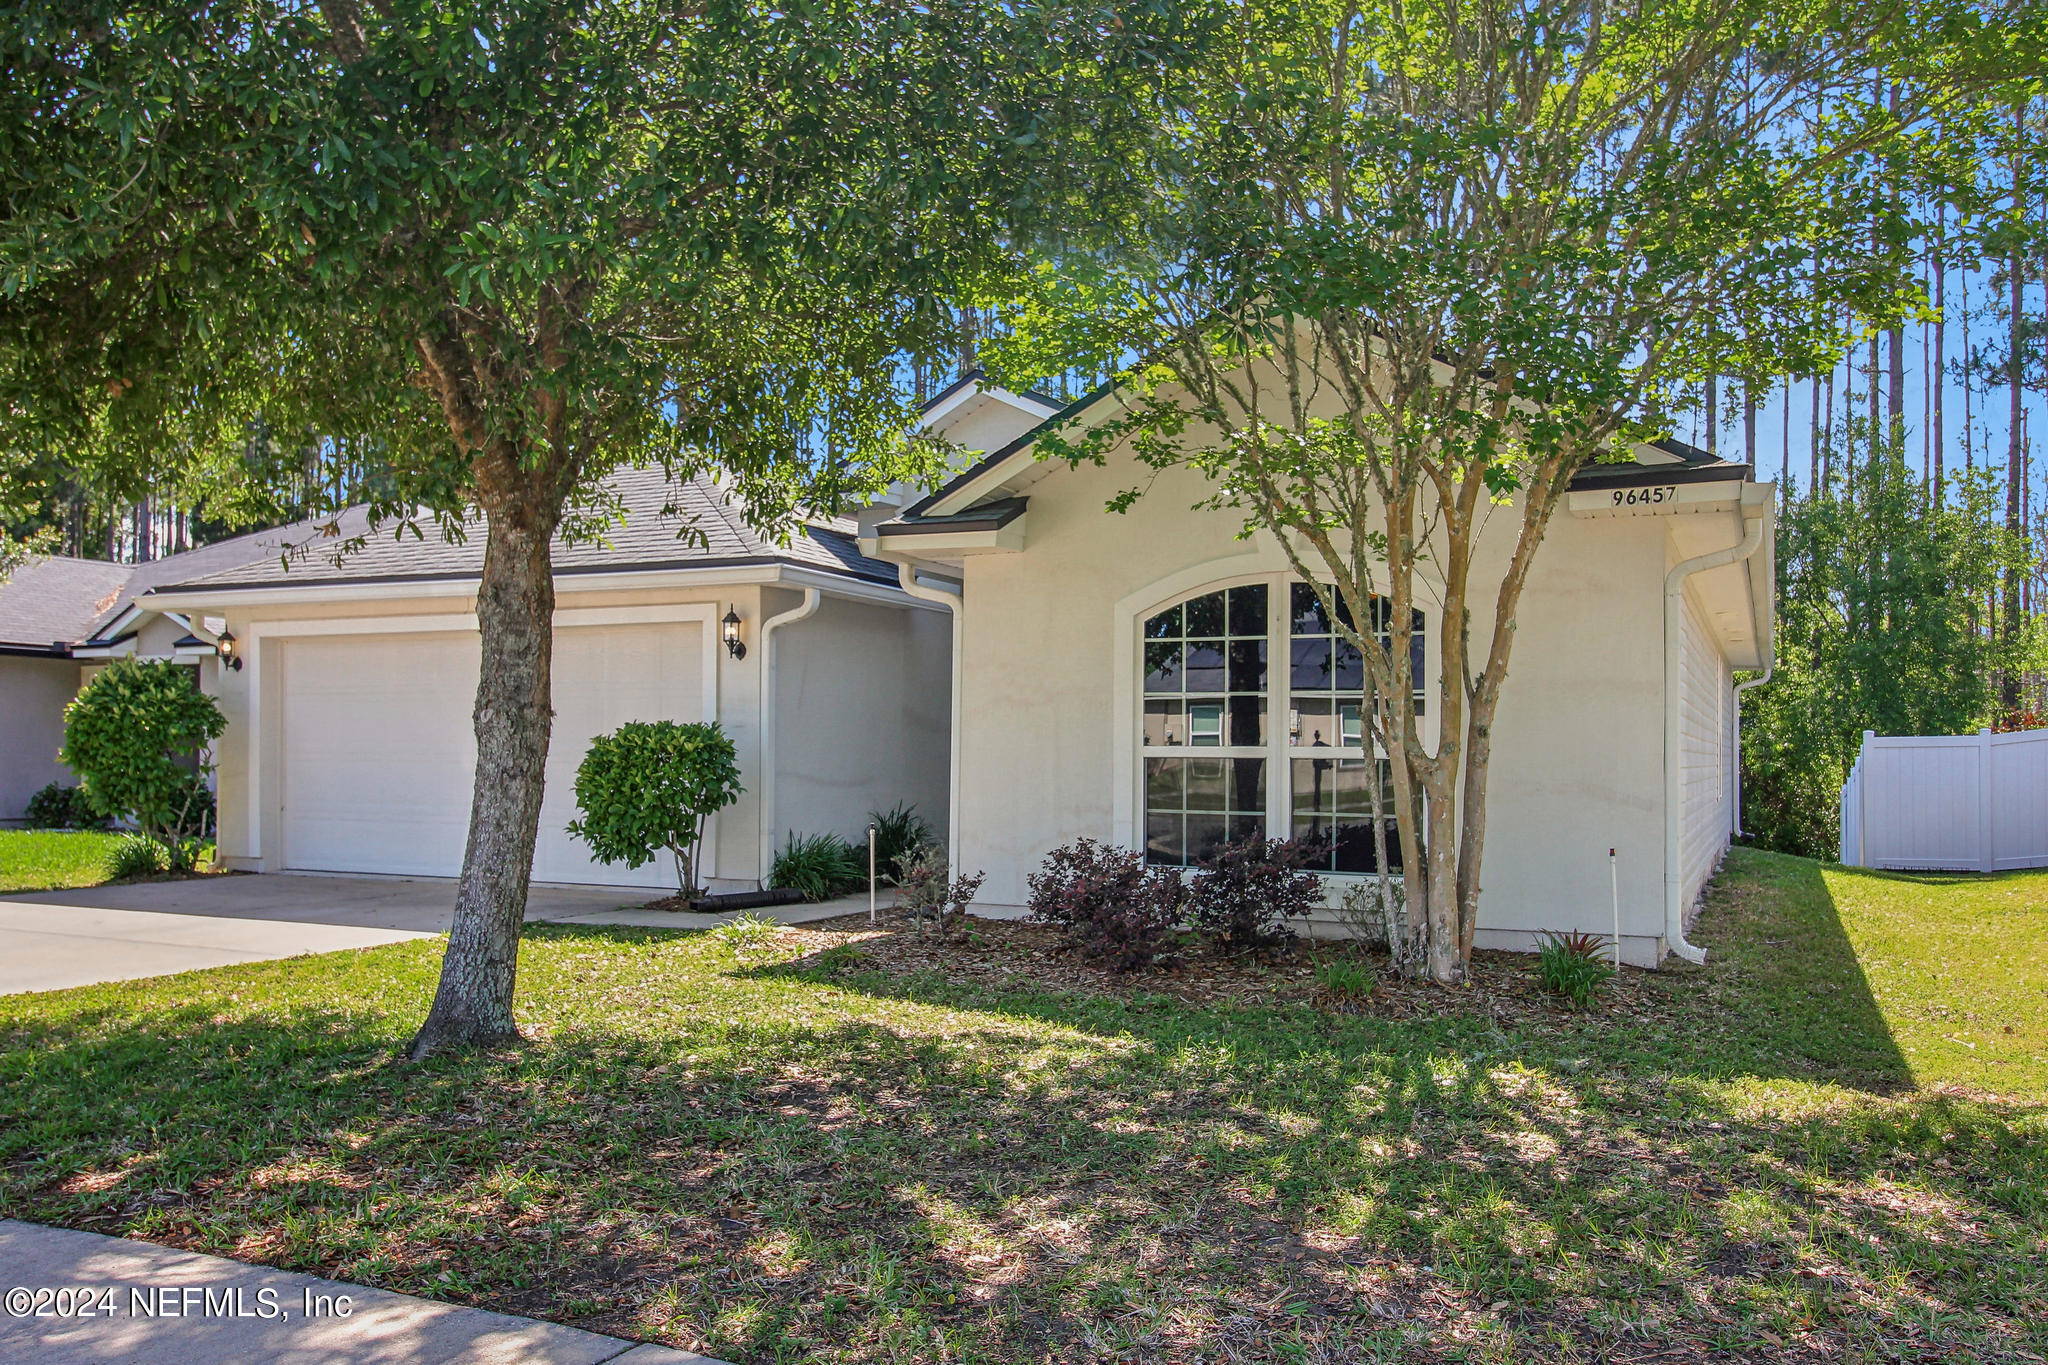 Yulee, FL home for sale located at 96457 Commodore Point Drive, Yulee, FL 32097